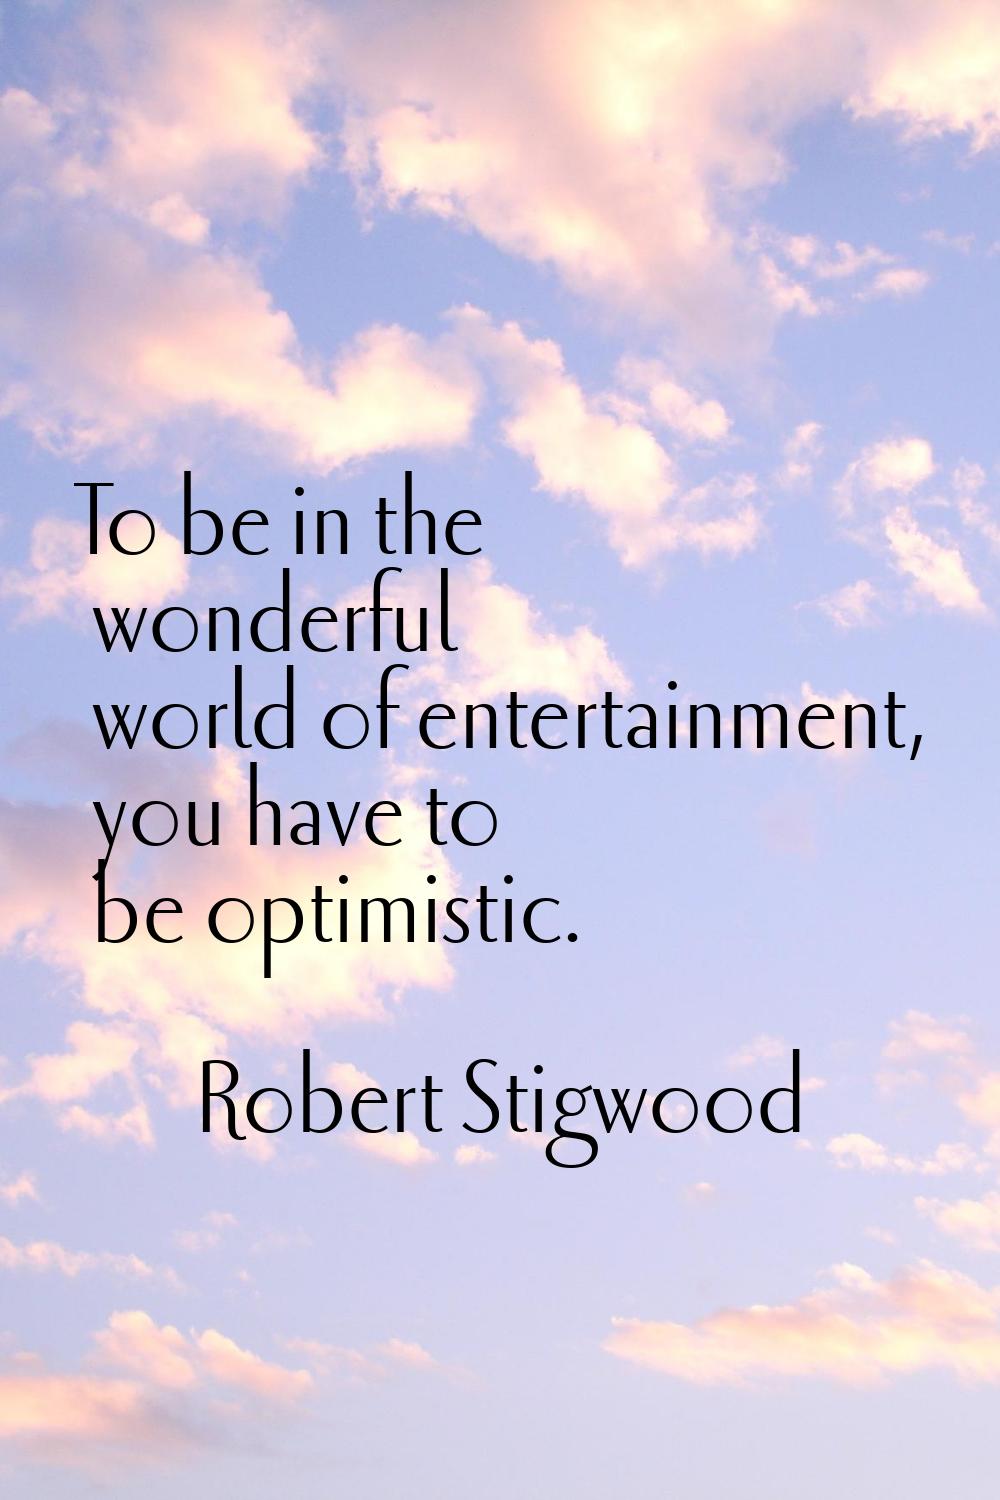 To be in the wonderful world of entertainment, you have to be optimistic.